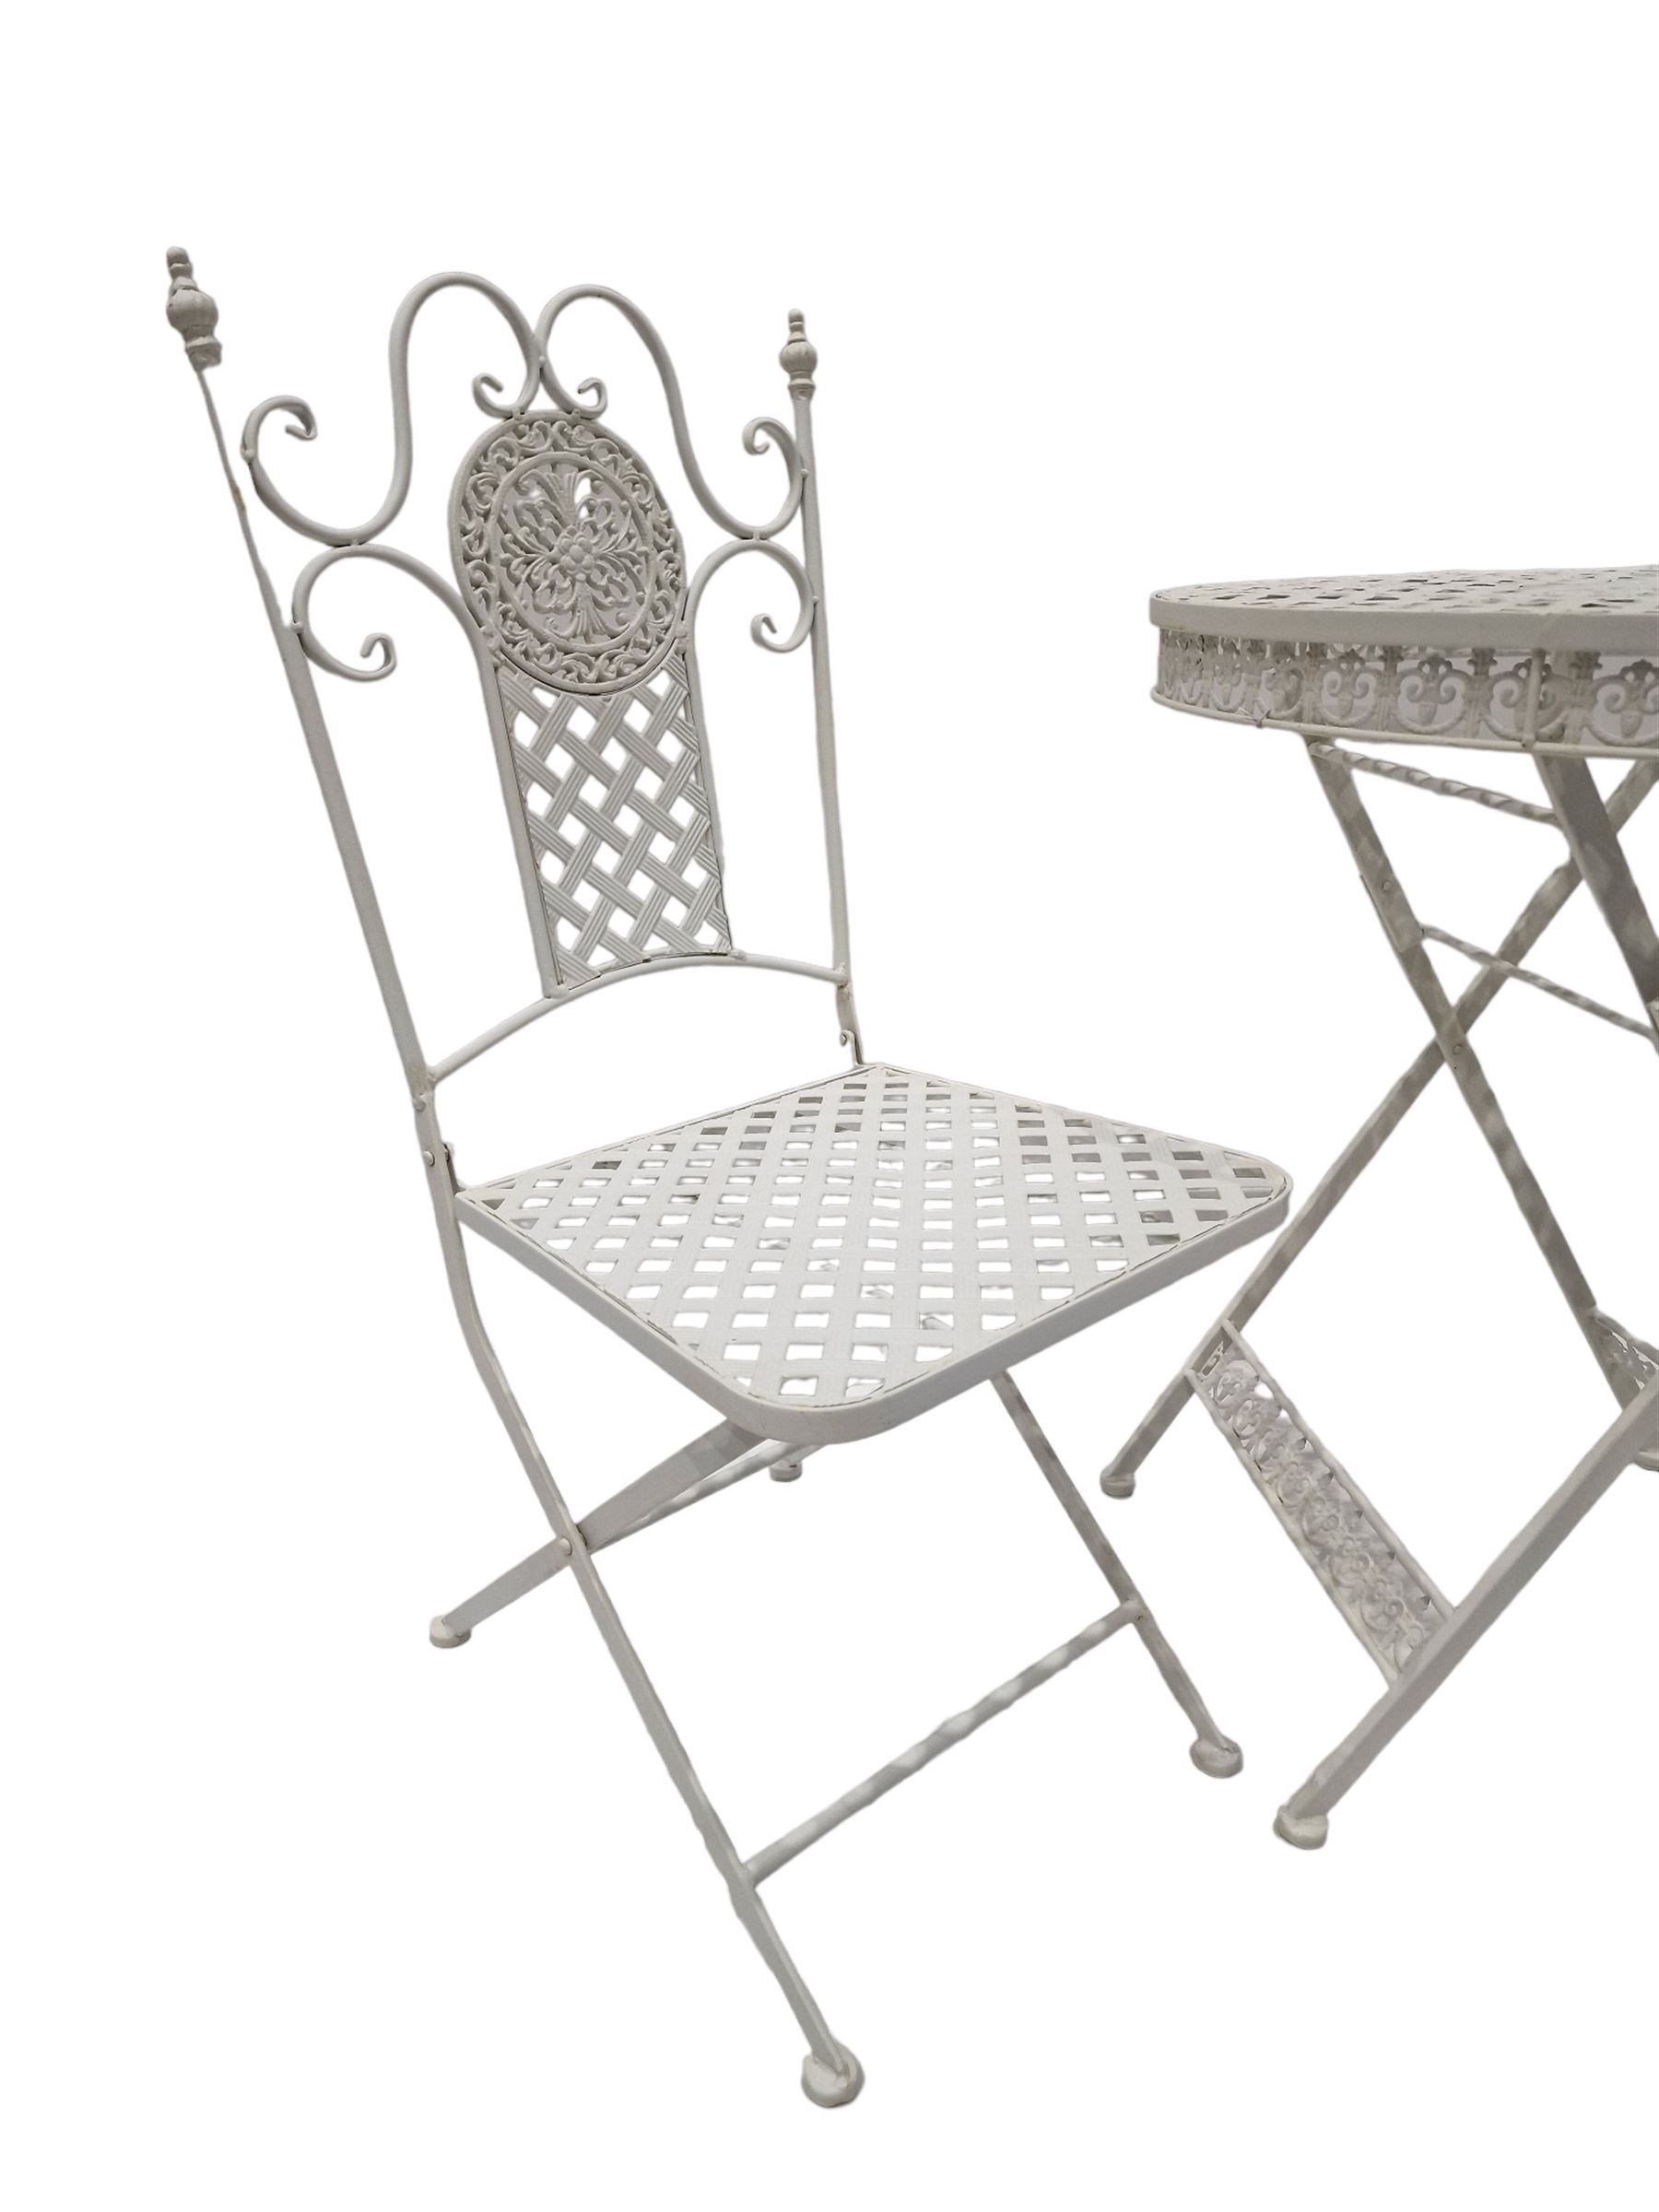 Wrought iron mesh style round bistro table and two chairs in white finish - THIS LOT IS TO BE COLLE - Image 3 of 4